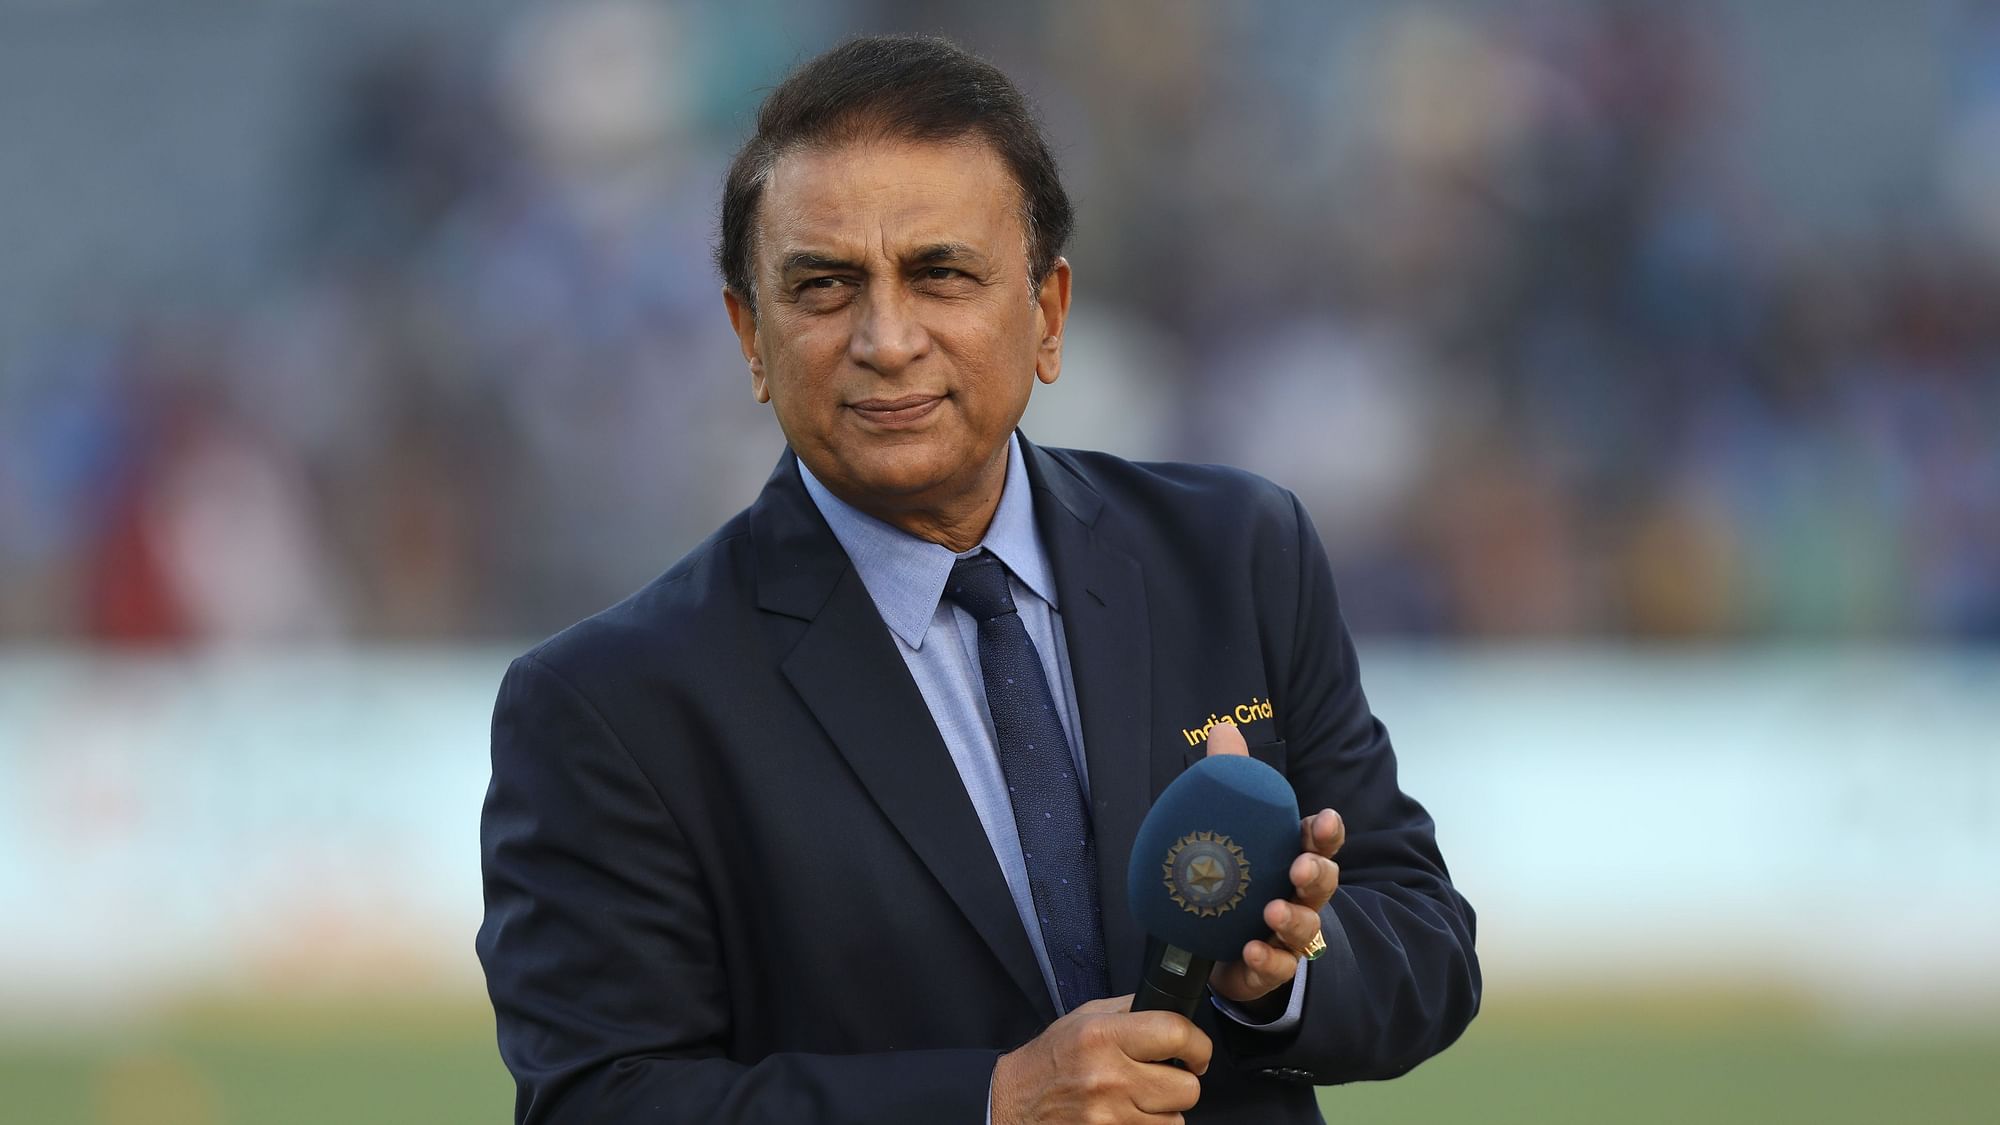 Sunil Gavaskar has clarified that he had not sought paternity leave from the BCCI in 1975-76.